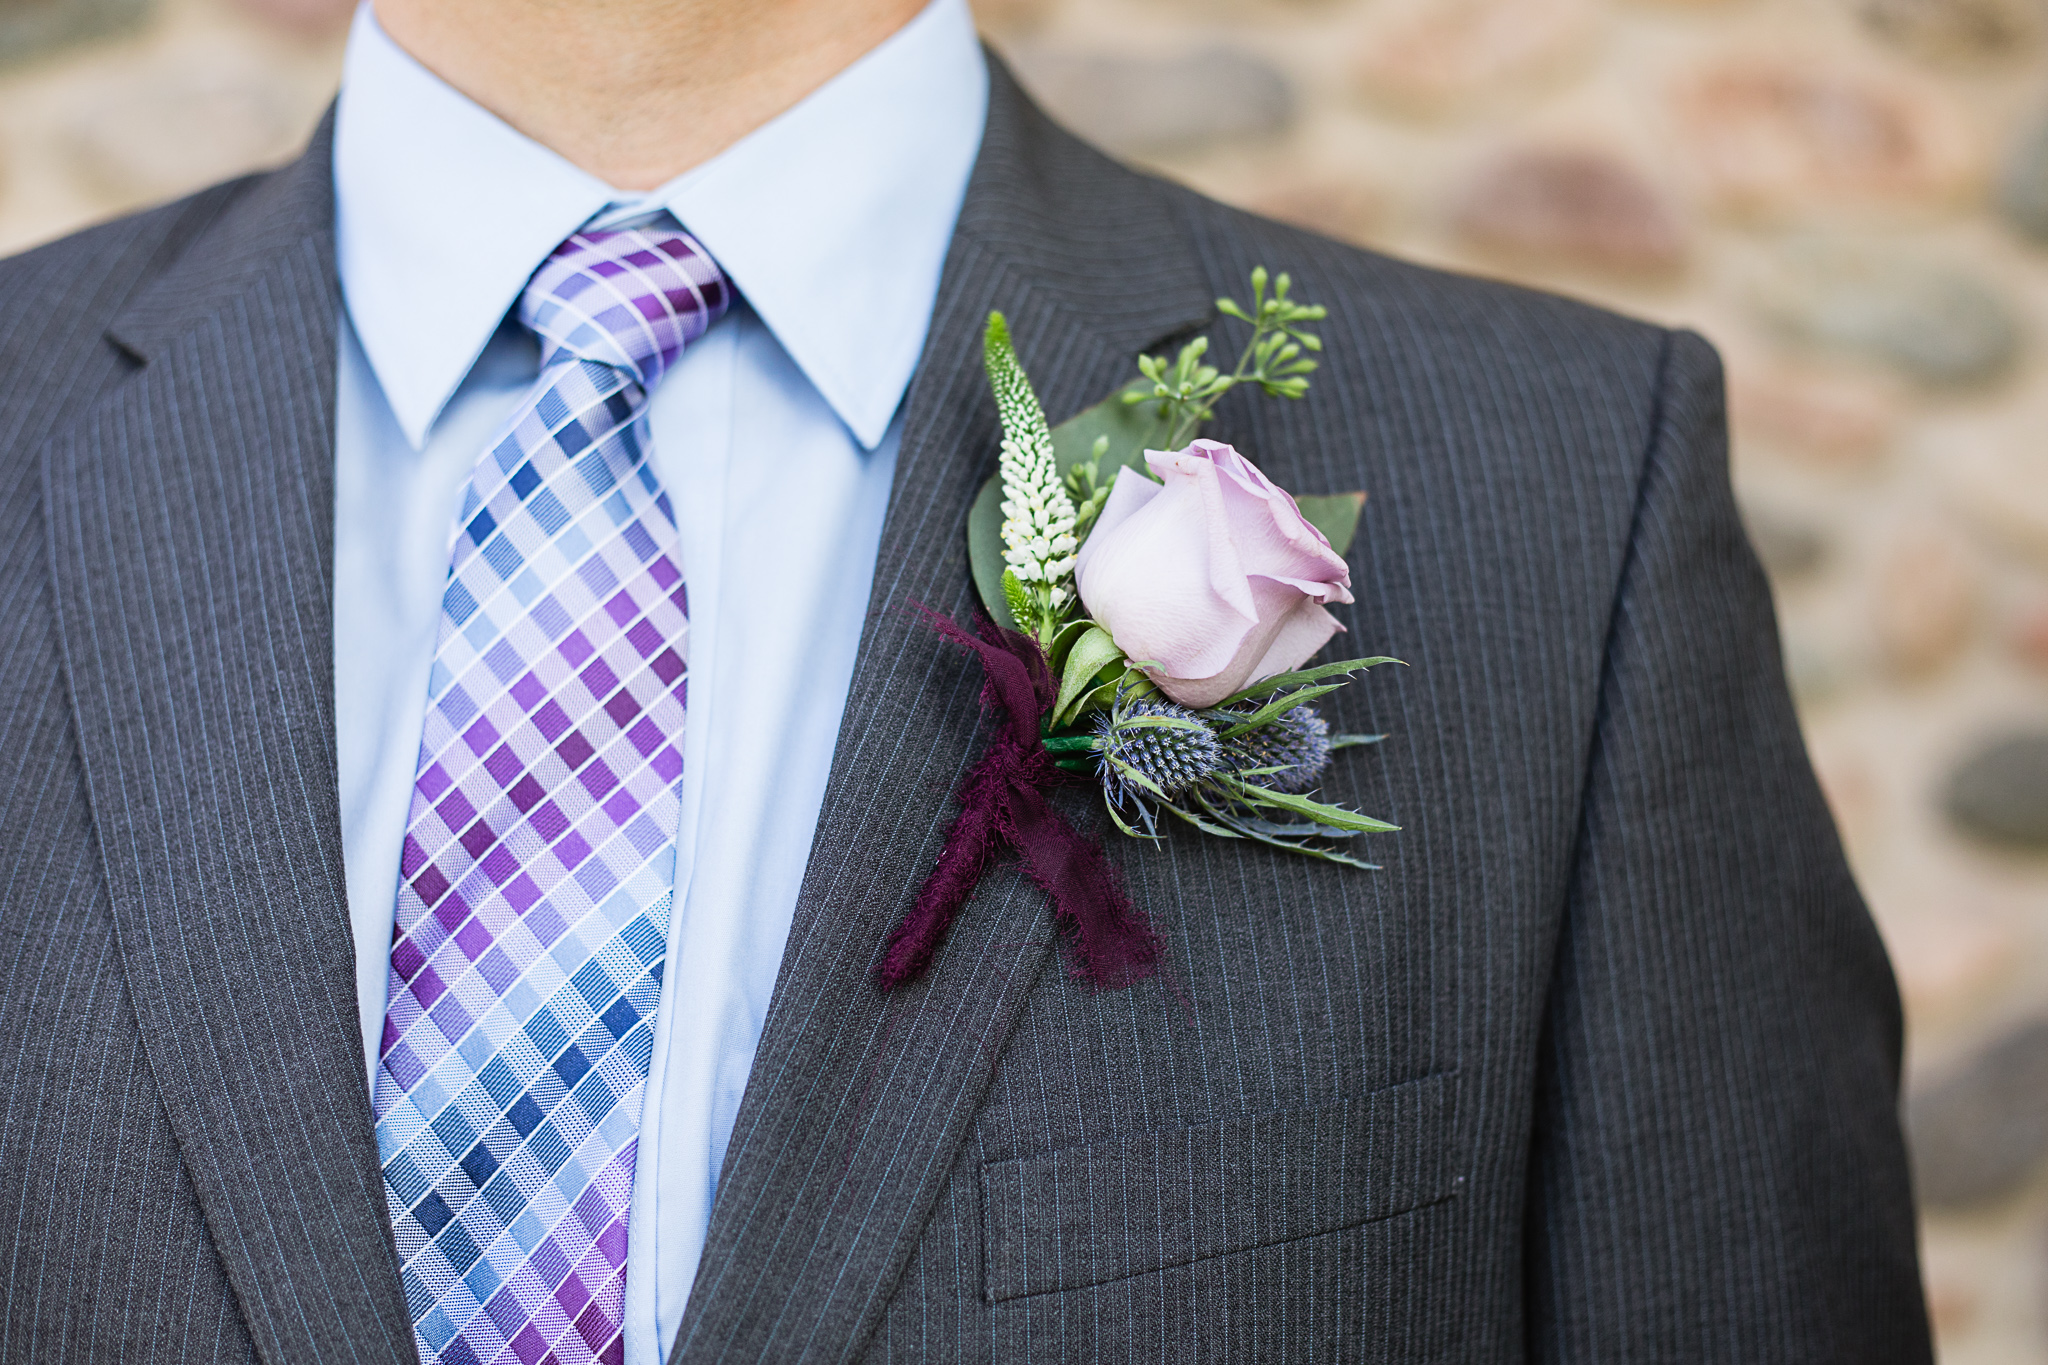 Groom's boutonniere and suit detail by Phoenix wedding photographer PMA Photography.